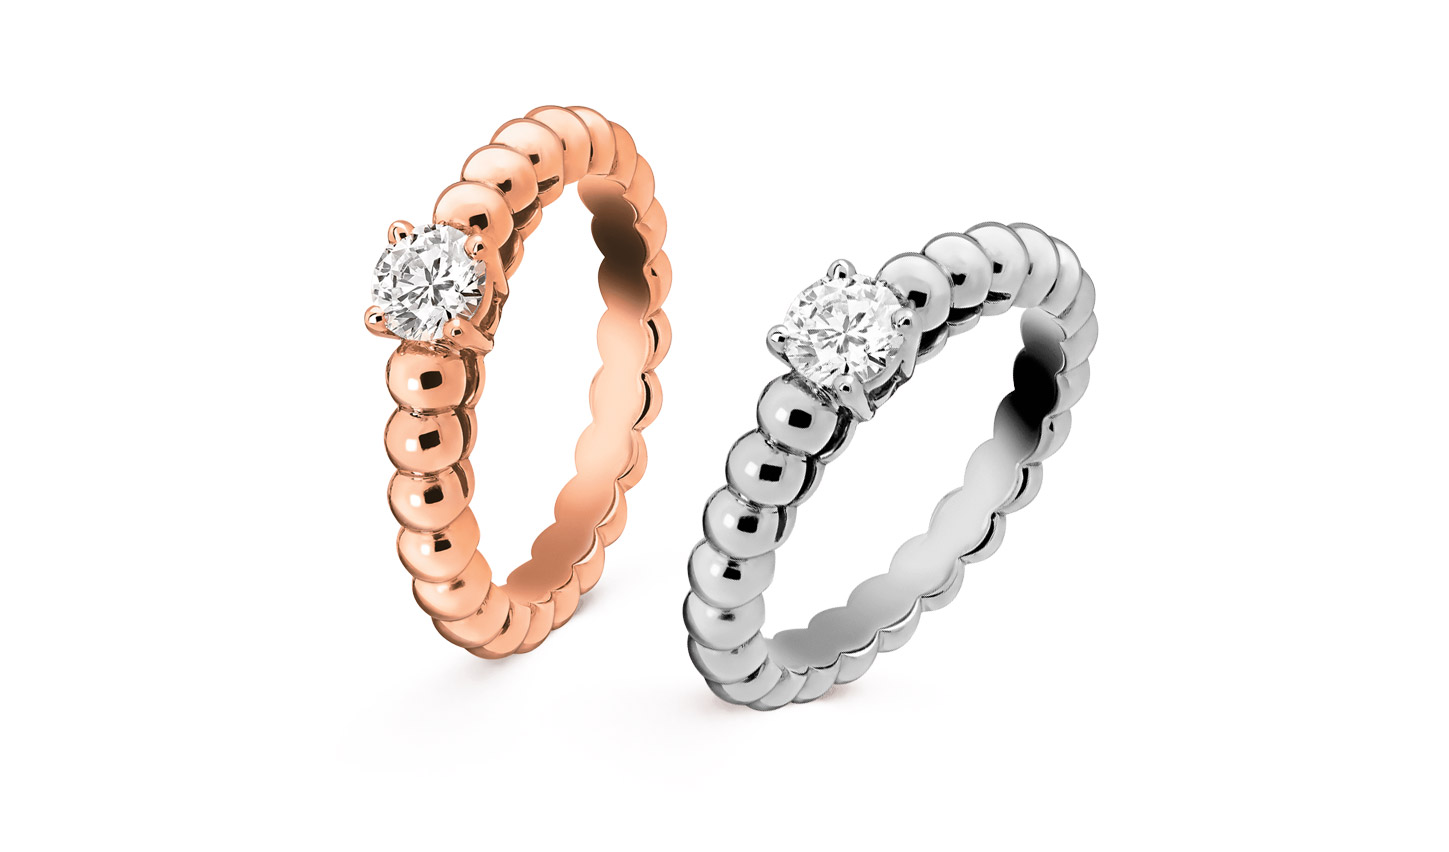 Van Cleef & Arpels 'Perlée solitaire' rose gold and white gold diamond engagement rings